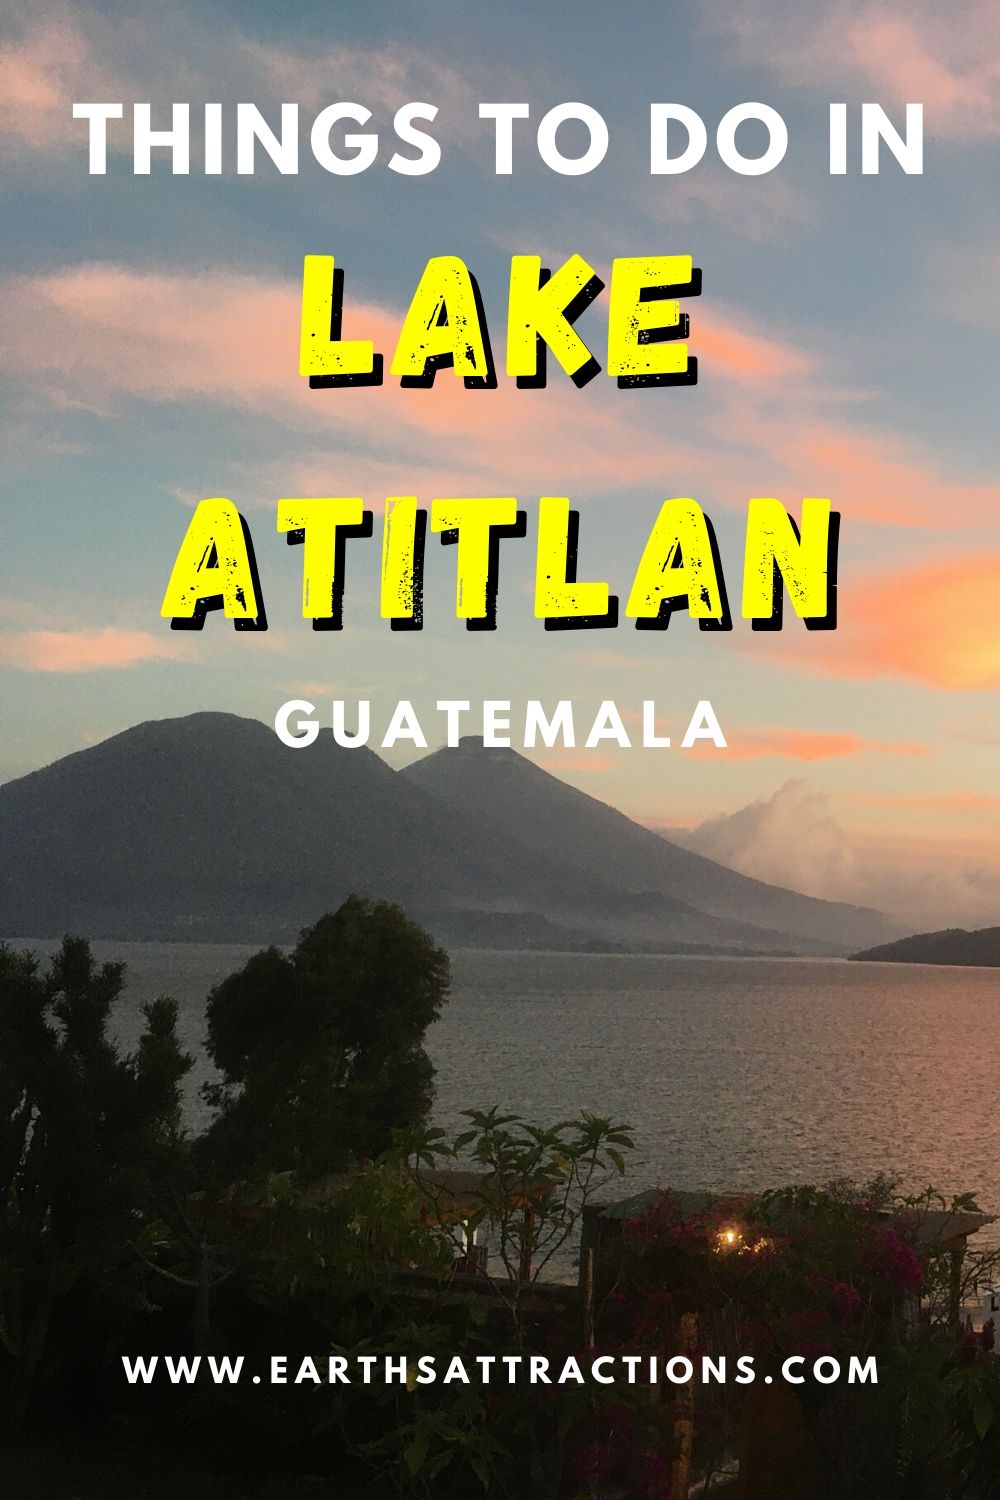 Things to do in Lake Atitlan, Guatemala. Discover the best Lake Atitlan activities, wonderful Lake Atitlan villages and more! Useful travel tips for visiting Lake Atitlan are included as well as Lake Atitlan vacation costs. #lakeatitlan #atitlanguide #atitlanitinerary #atitlanguatemala #earthsattractions #travelguides #america #centralamerica #traveldestinations